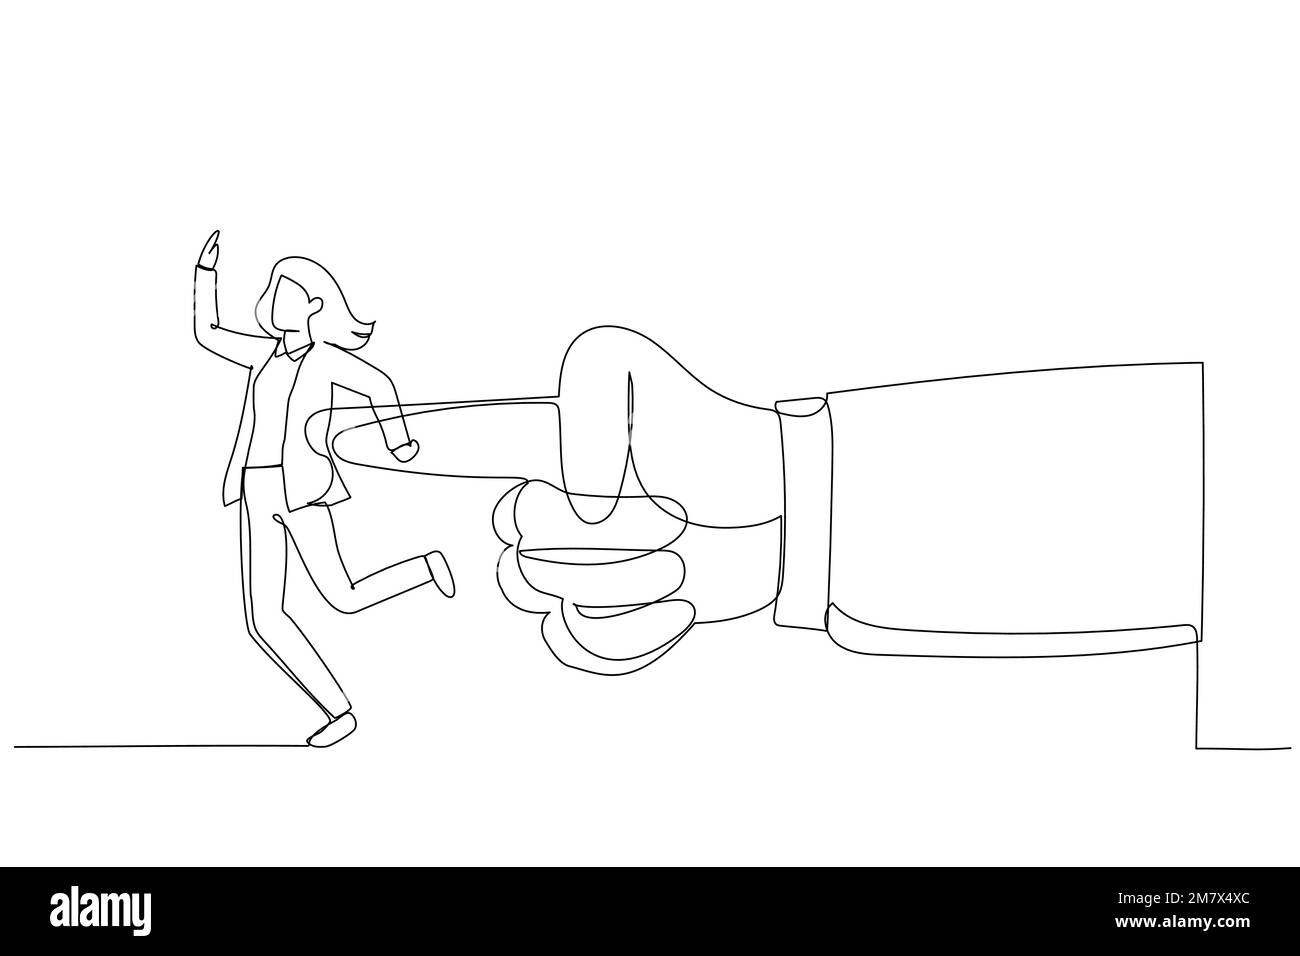 Illustration of giant hand pushing businesswoman. Metaphor for giving the push at work. Single line art style Stock Vector